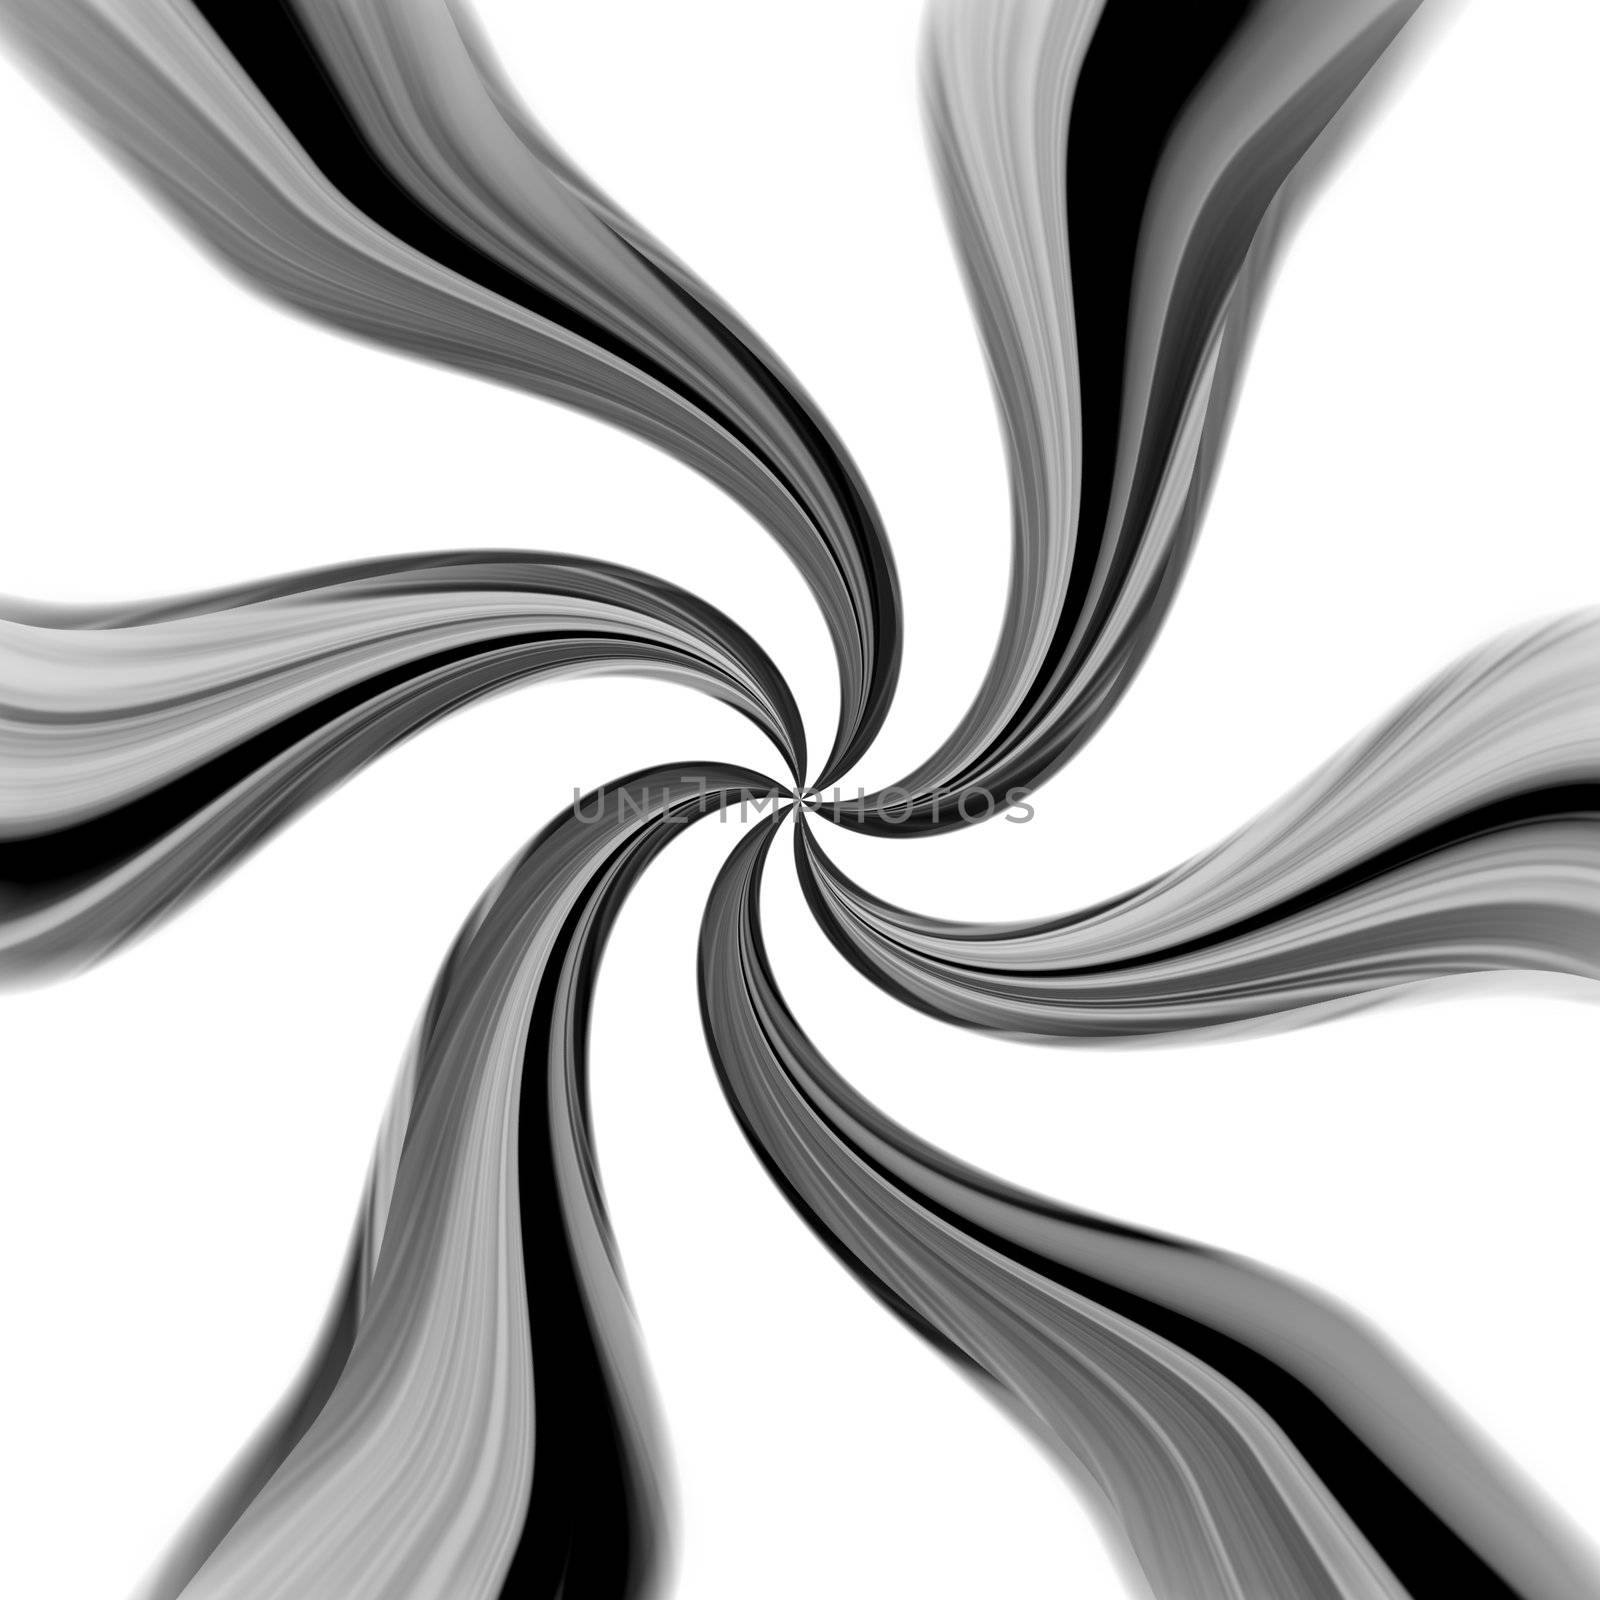 Shiny chrome vortex spiraling in a circular motion isolated over a white background.